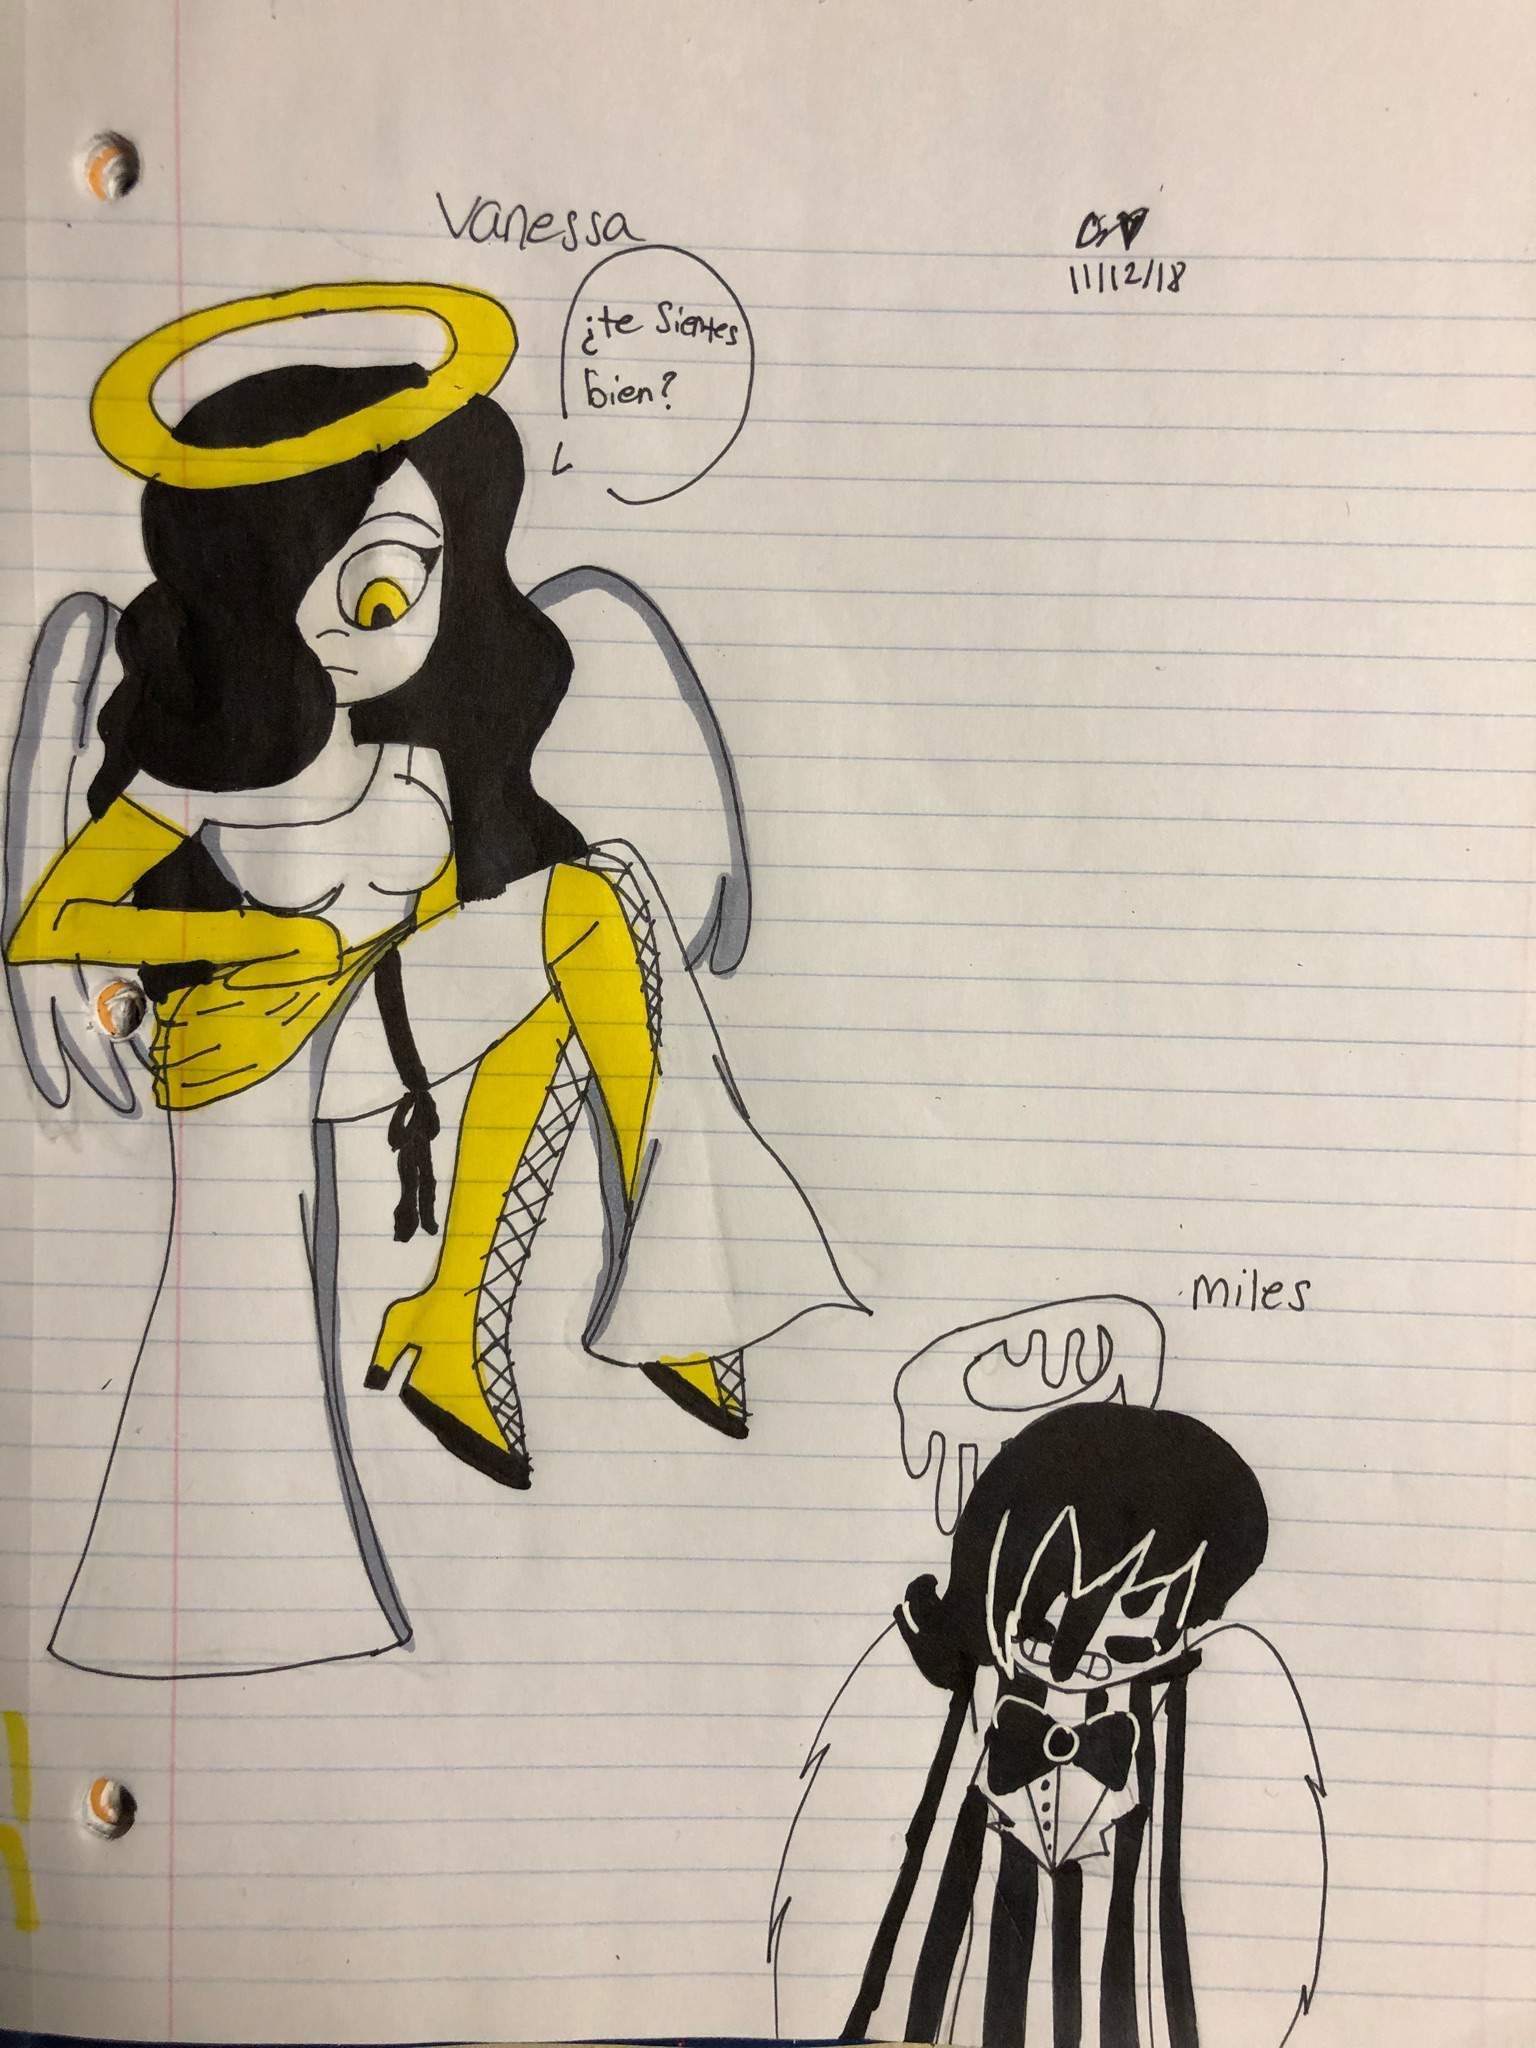 bendy and the ink machine alice angel black and white